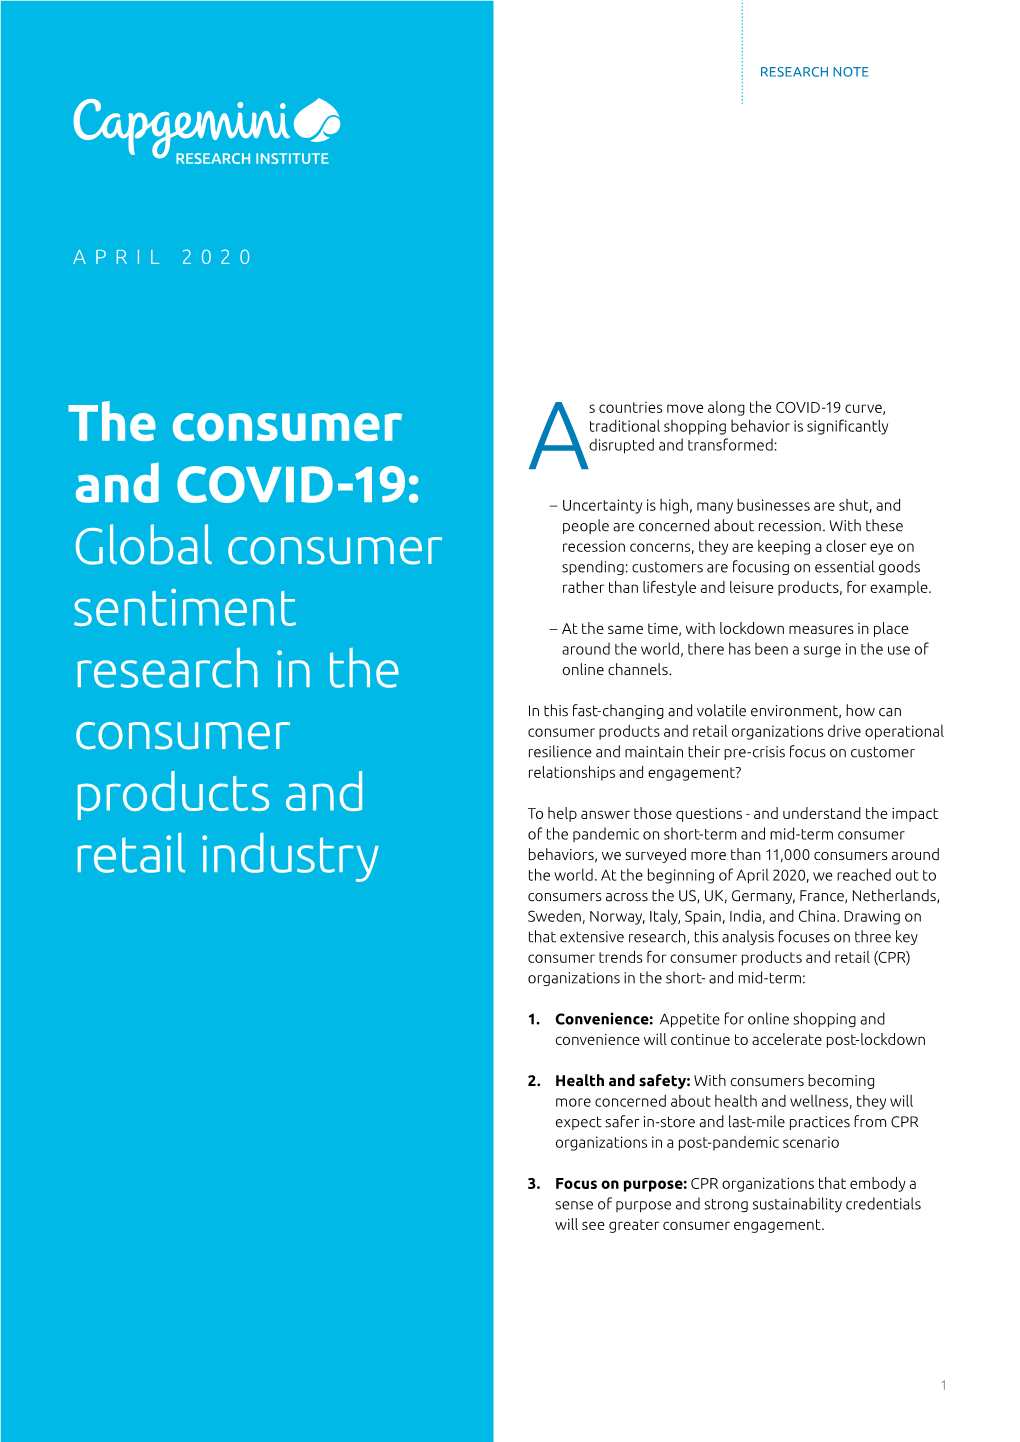 Research in the Consumer Products and Retail Industry